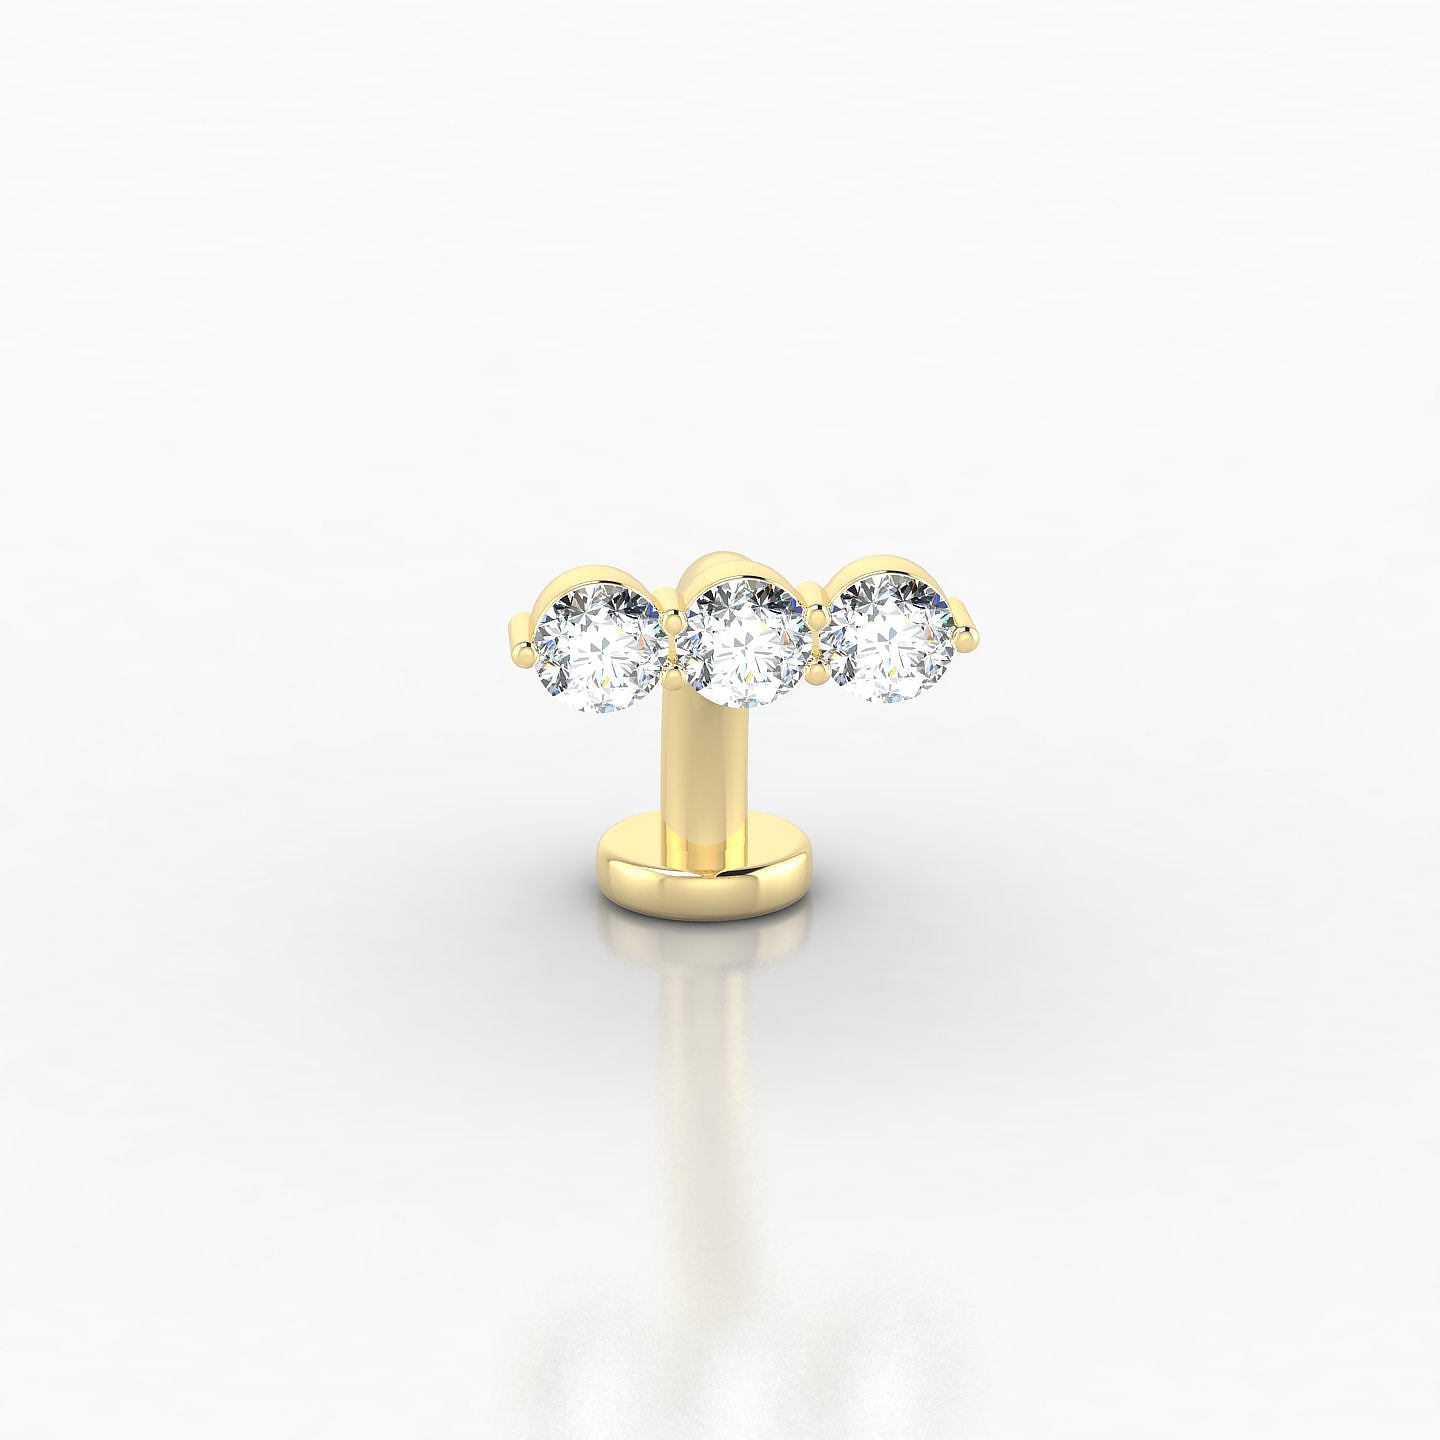 Ma'at | 18k Yellow Gold 10 mm 9 mm Trilogy Diamond Floating Navel Piercing